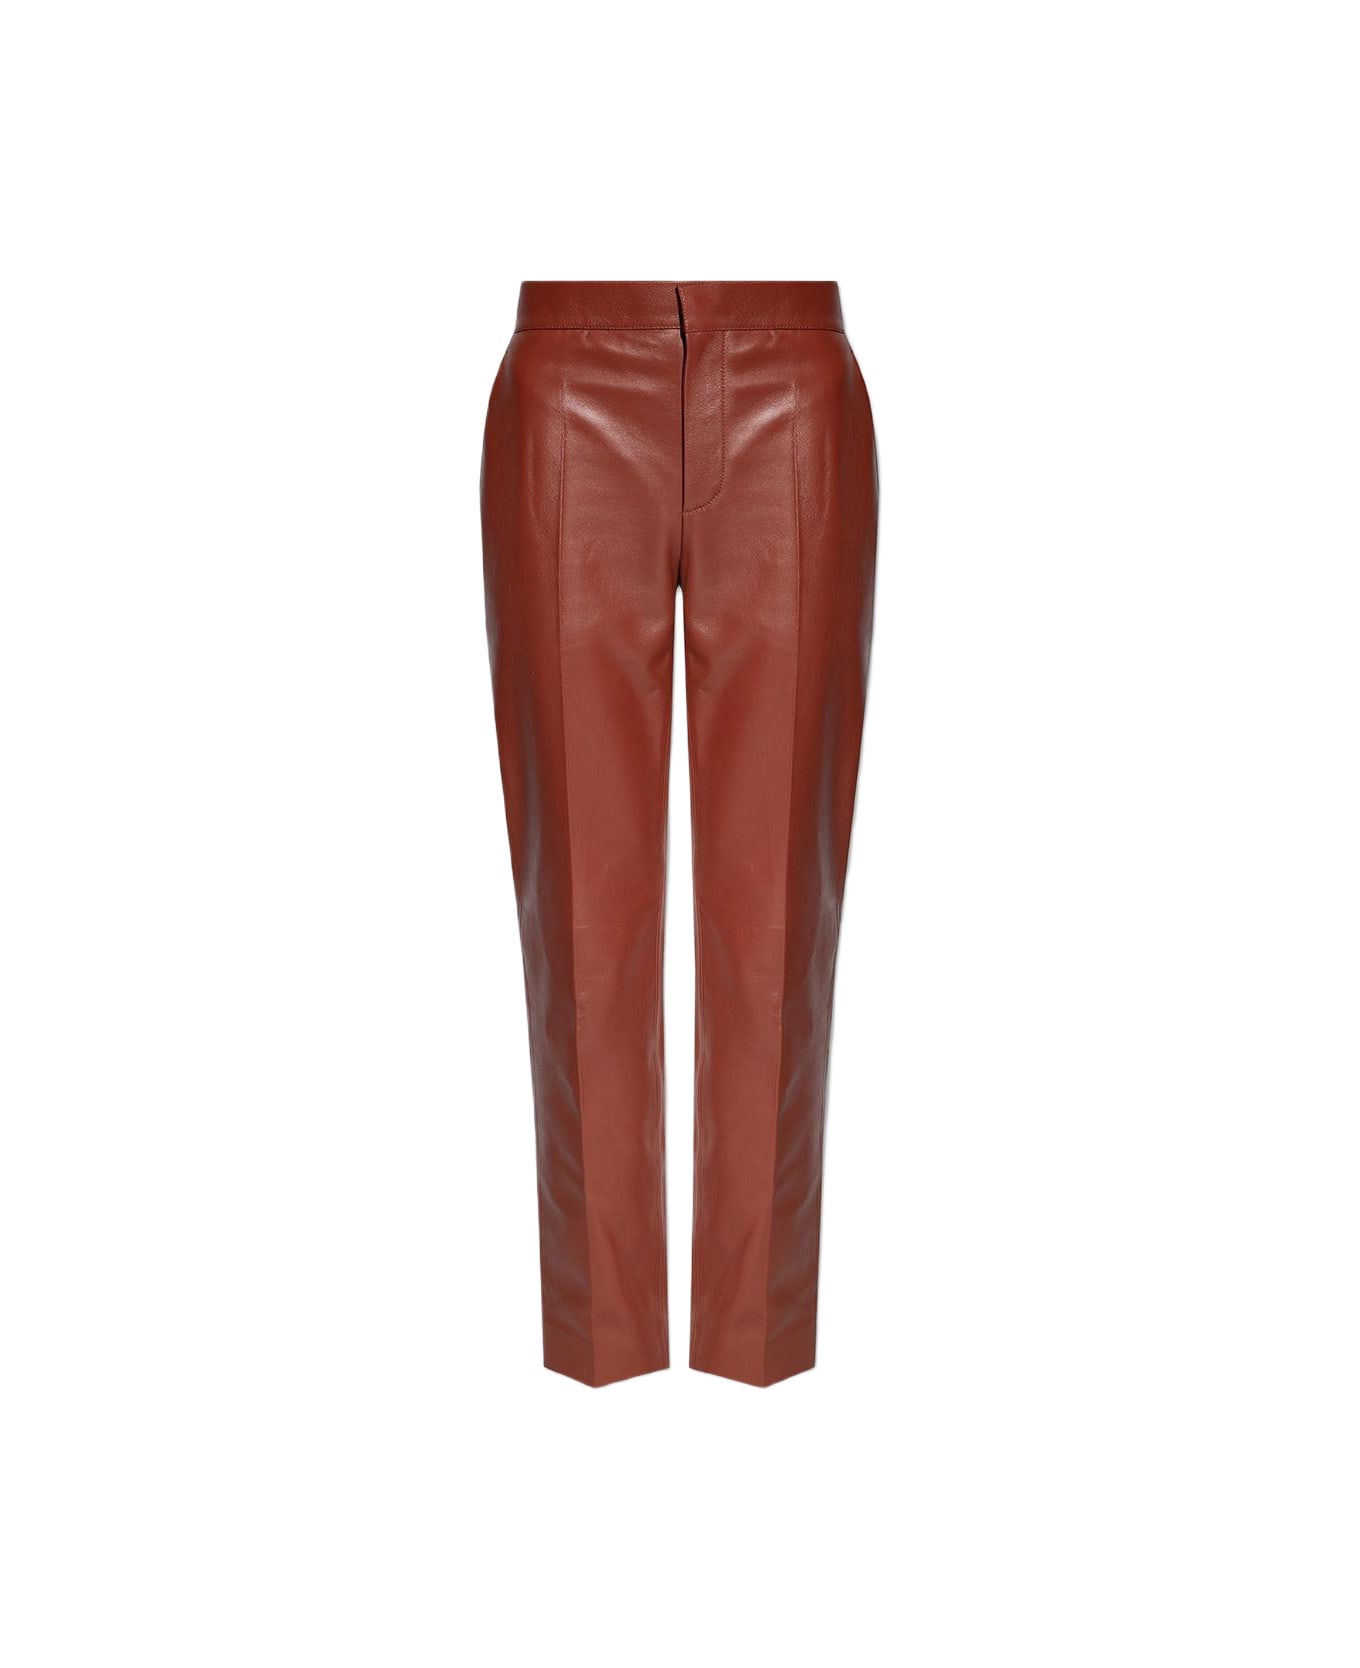 Chloé Leather Trousers - Brown